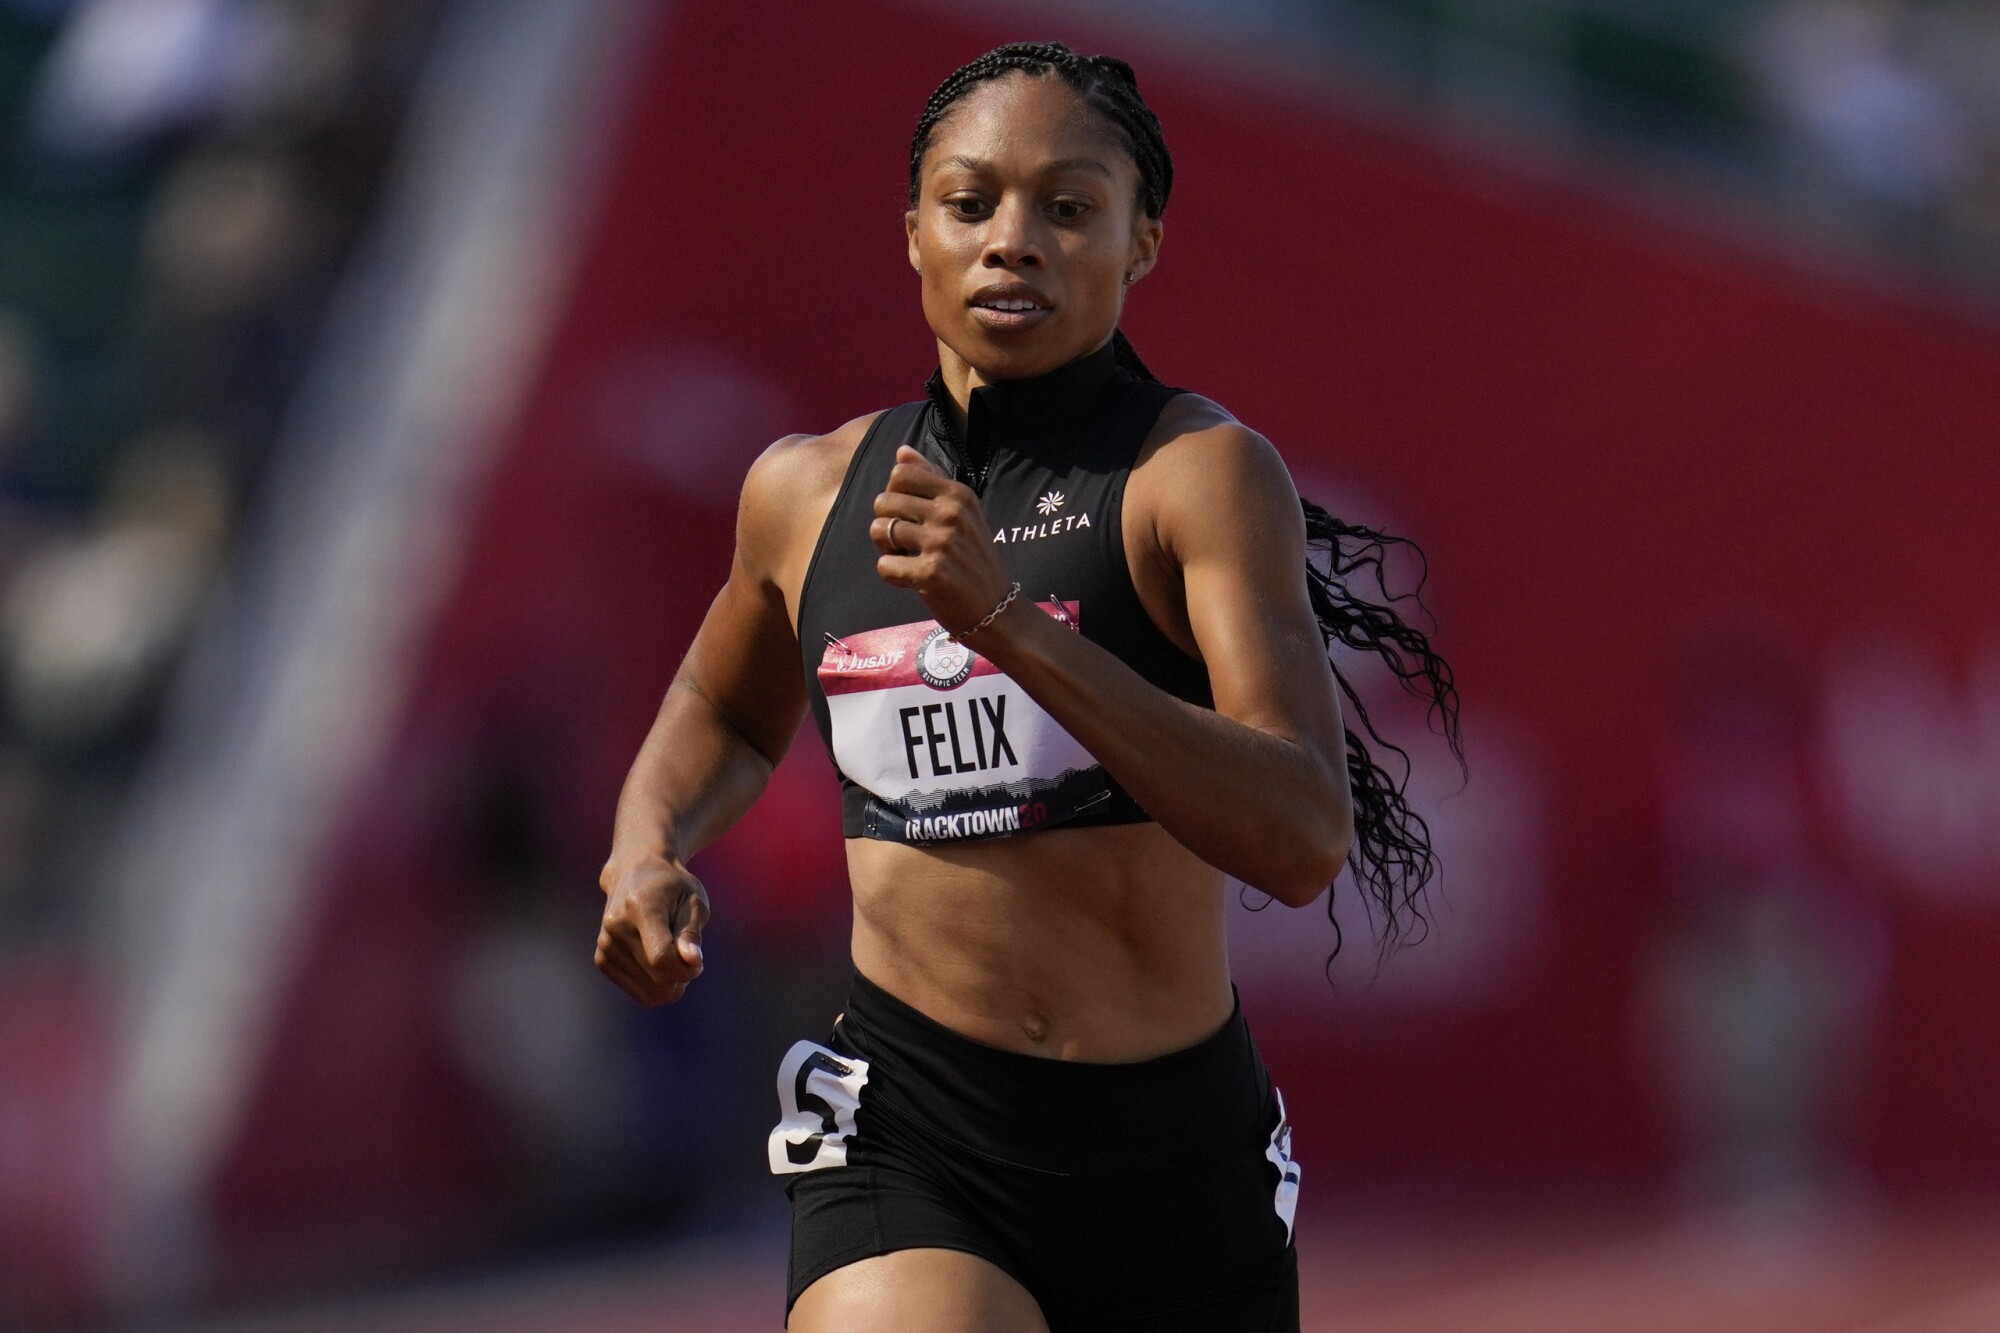 Allyson Felix wins the first heat of the women's 400 meters at the U.S. Olympic track and field trials.